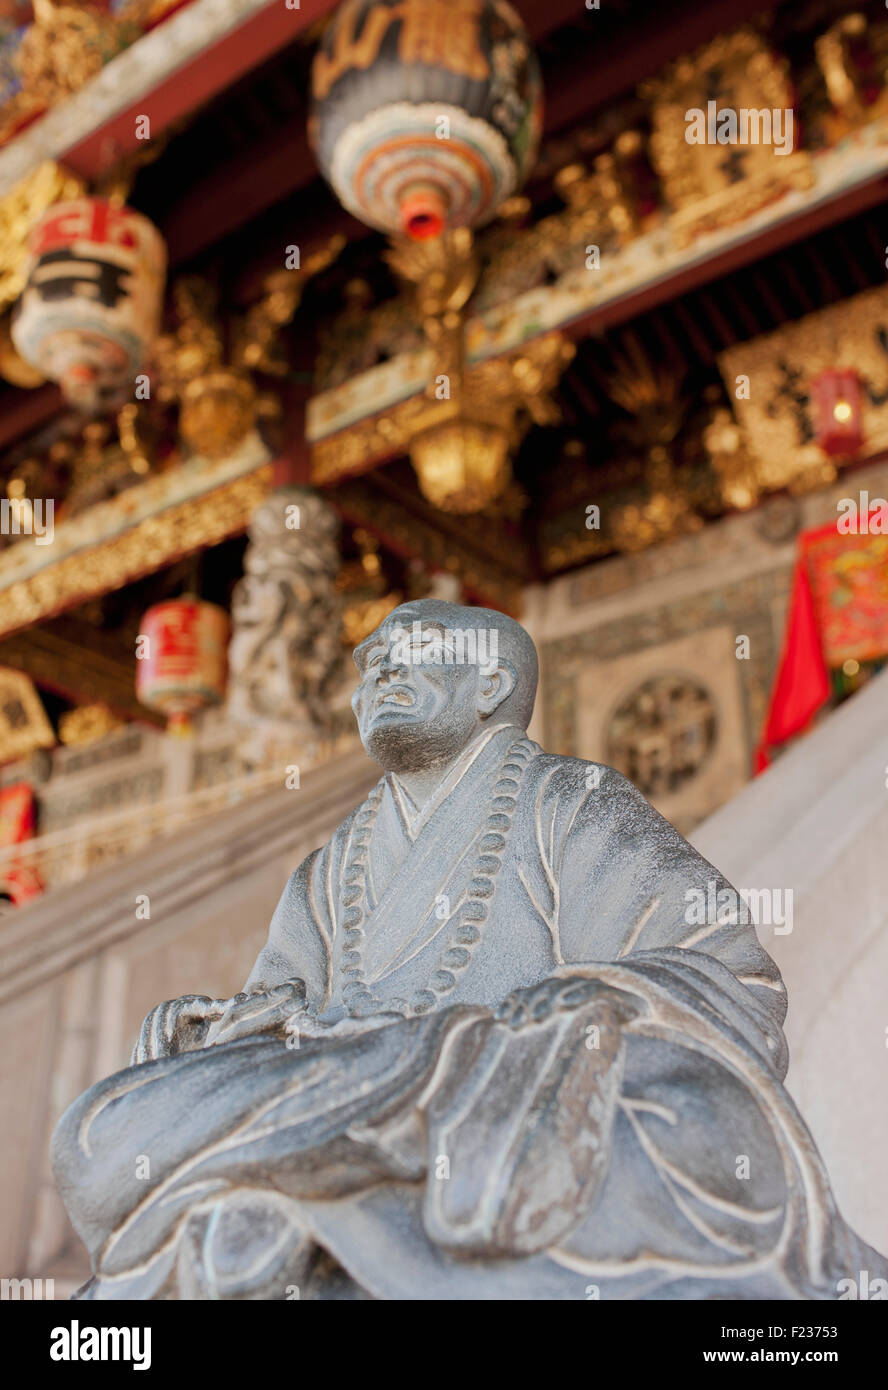 A stone Buddha statue at the entrance of the The Khoo Kongsi Clan House. Georgetown, Penang, Malaysia Stock Photo